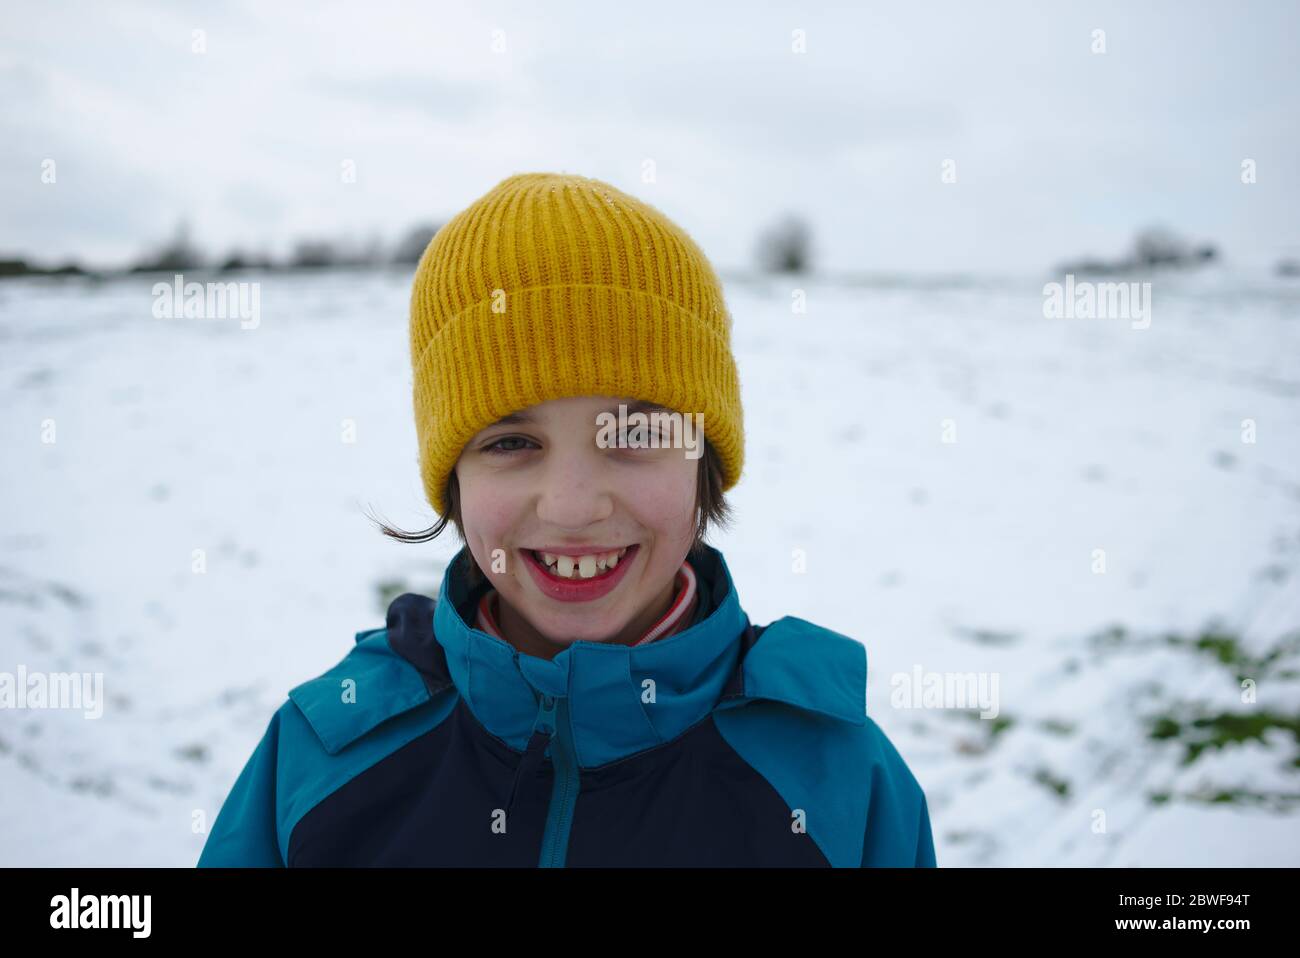 Happy smiling child in yellow hat outside in cold snowy winter weather Stock Photo